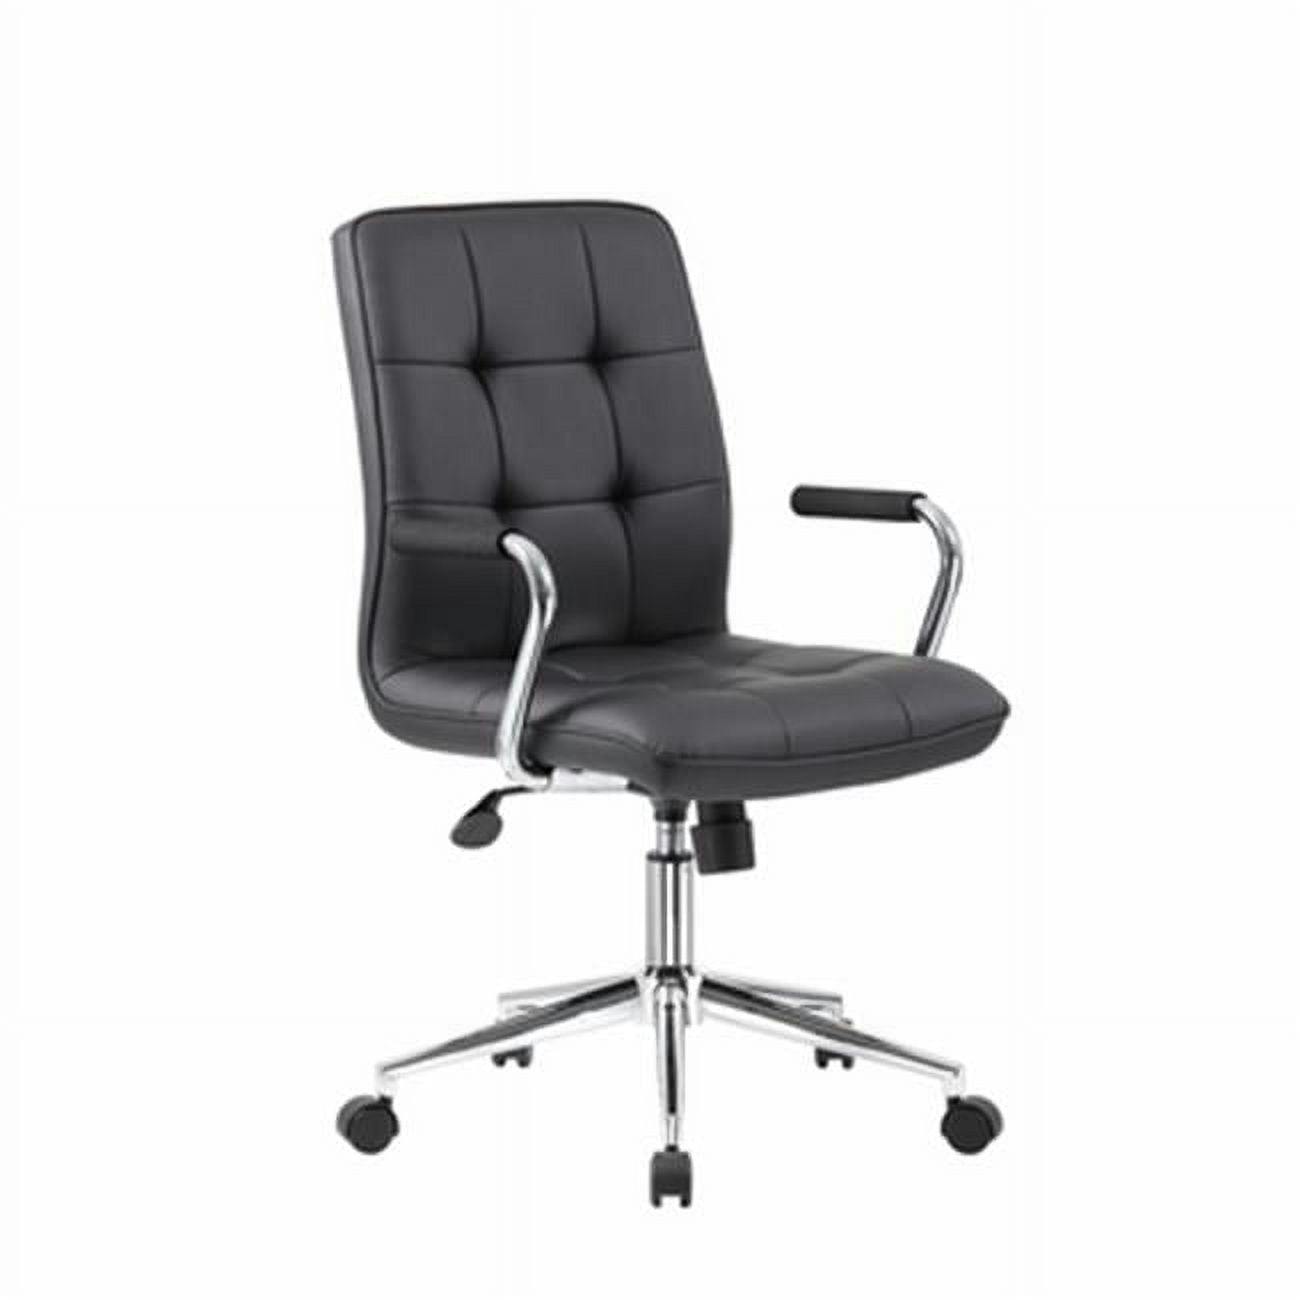 ErgoFlex Black Leather & Metal Swivel Task Chair with Chrome Accents